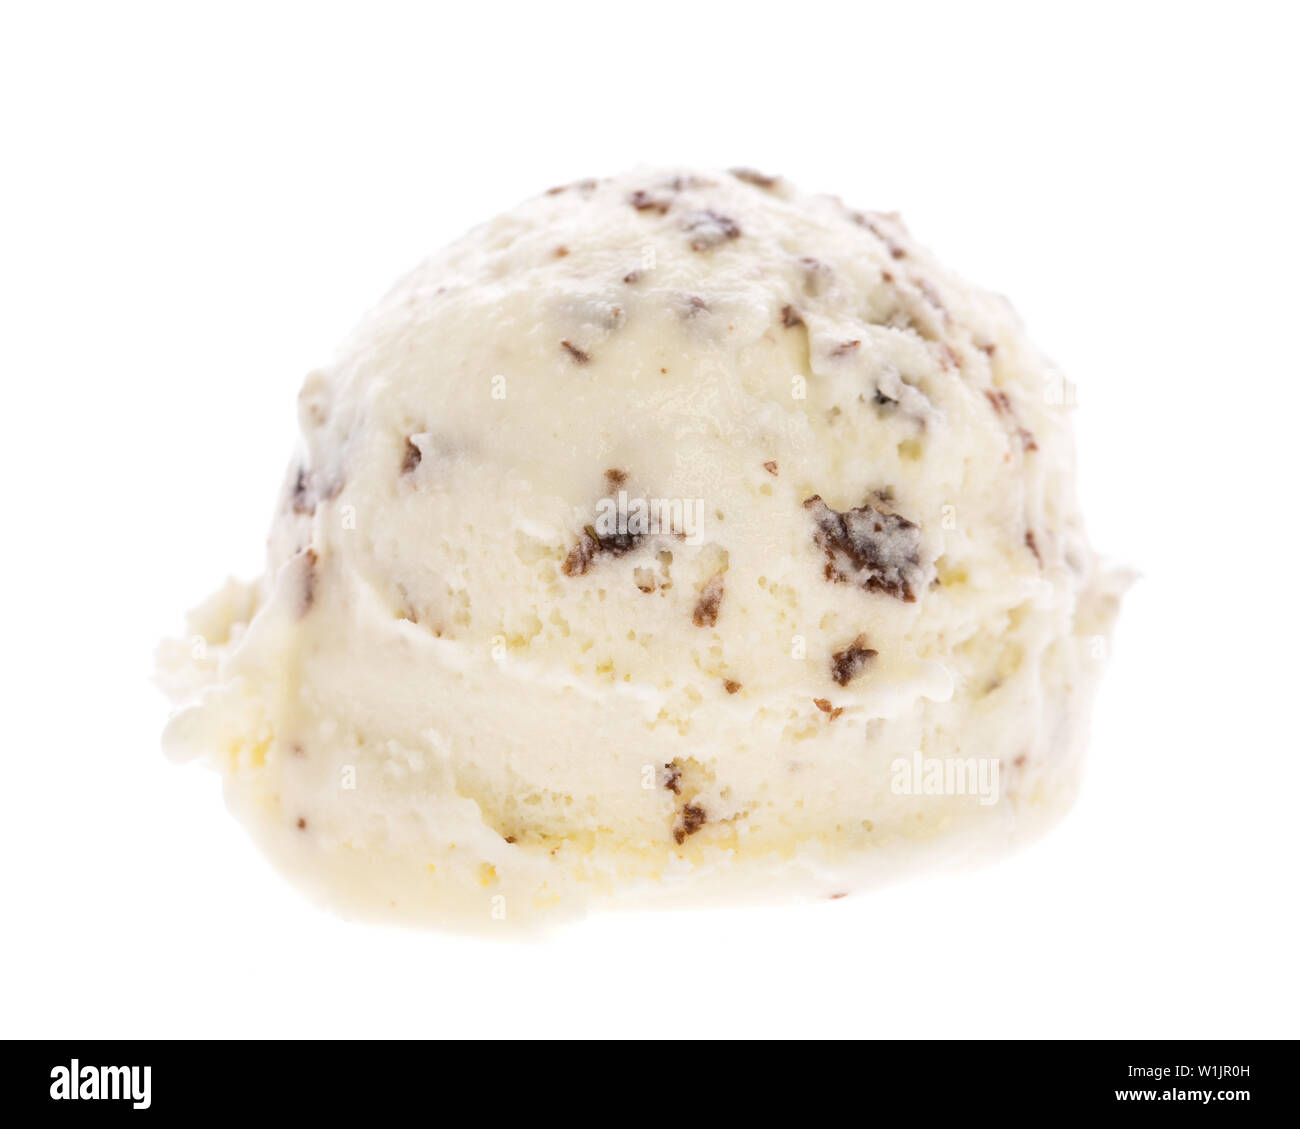 A single scoop of ice cream - Stracciatella, isolated on white background, front view Stock Photo